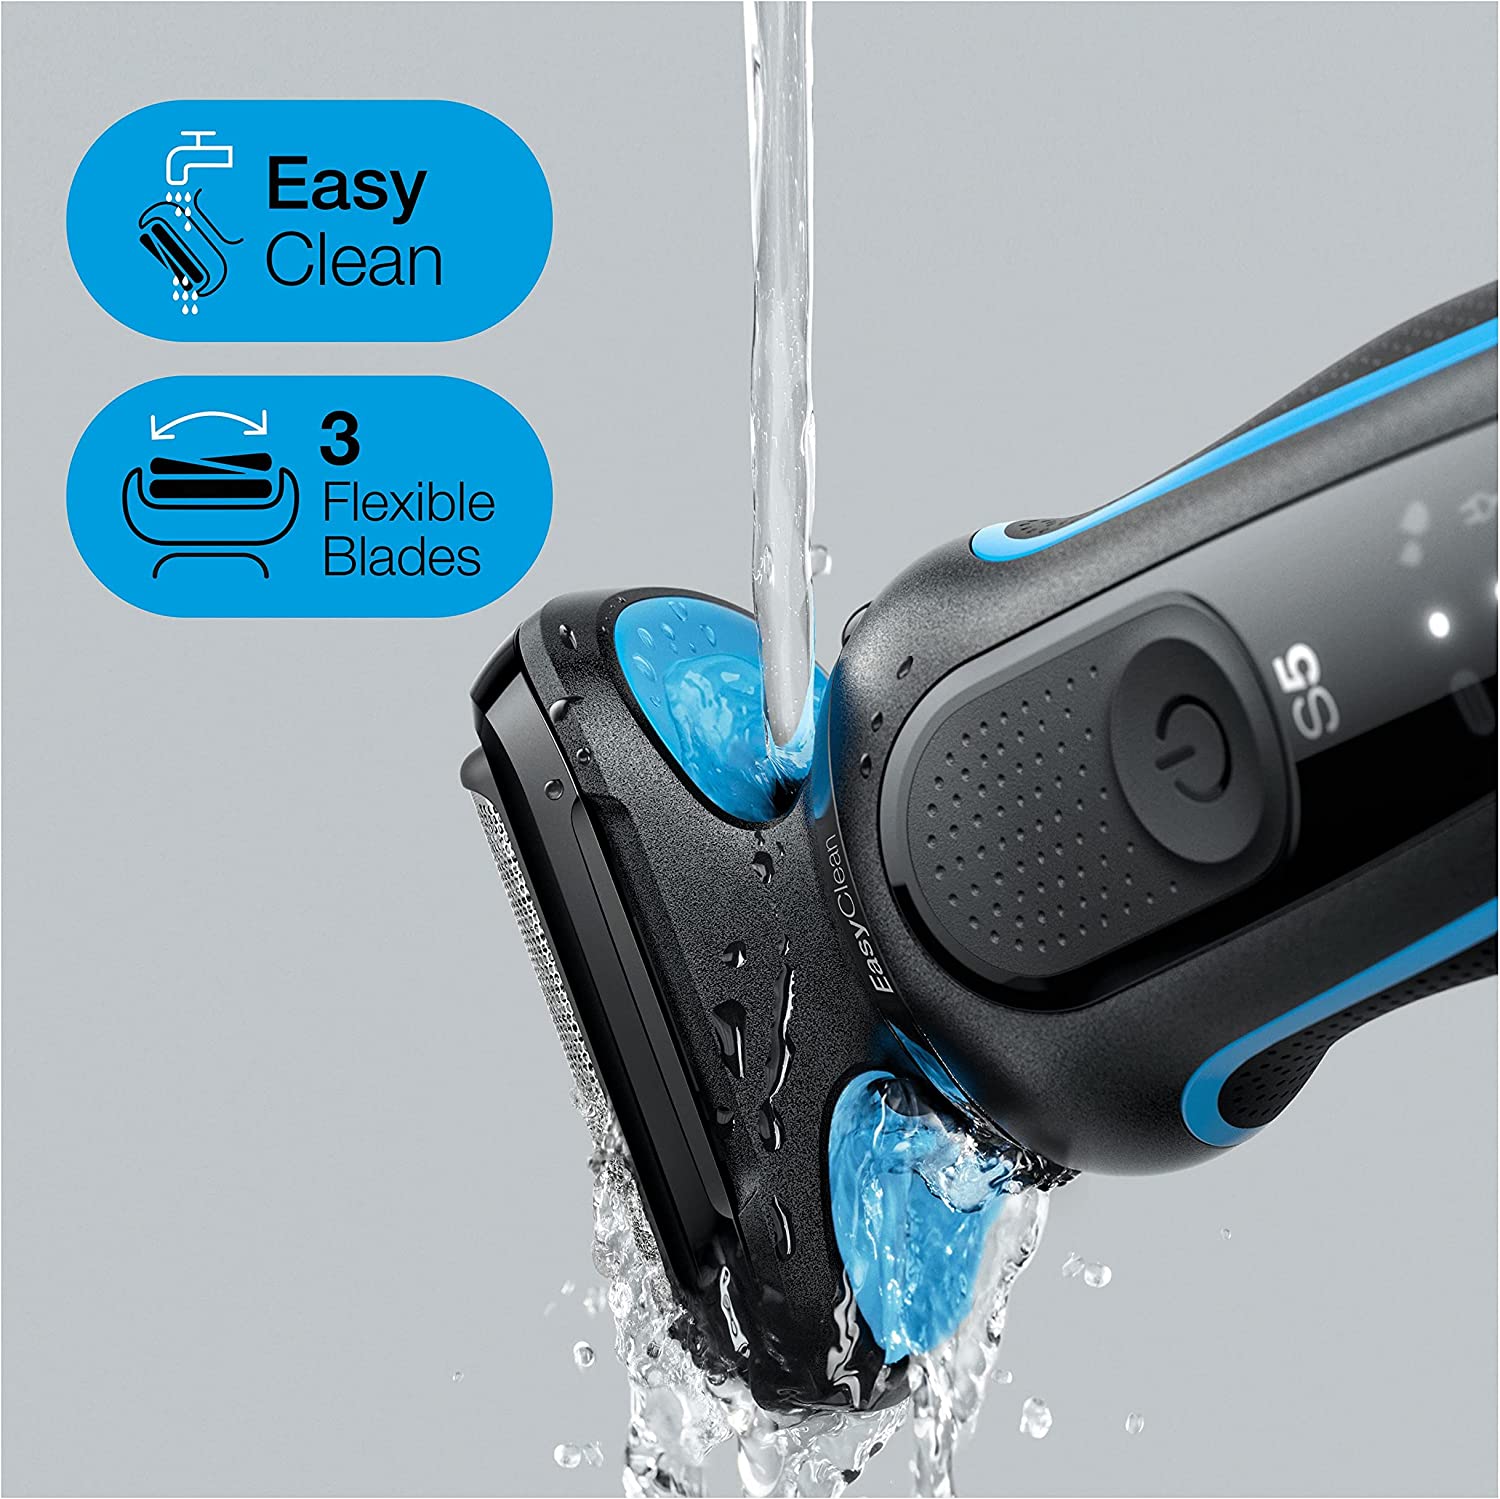 Braun Series 5 Electric Shaver, With Precision Trimmer Attachment 100% Waterproof, 50-B1200s with Extra Braun 53b Replacement Foil - Healthxpress.ie